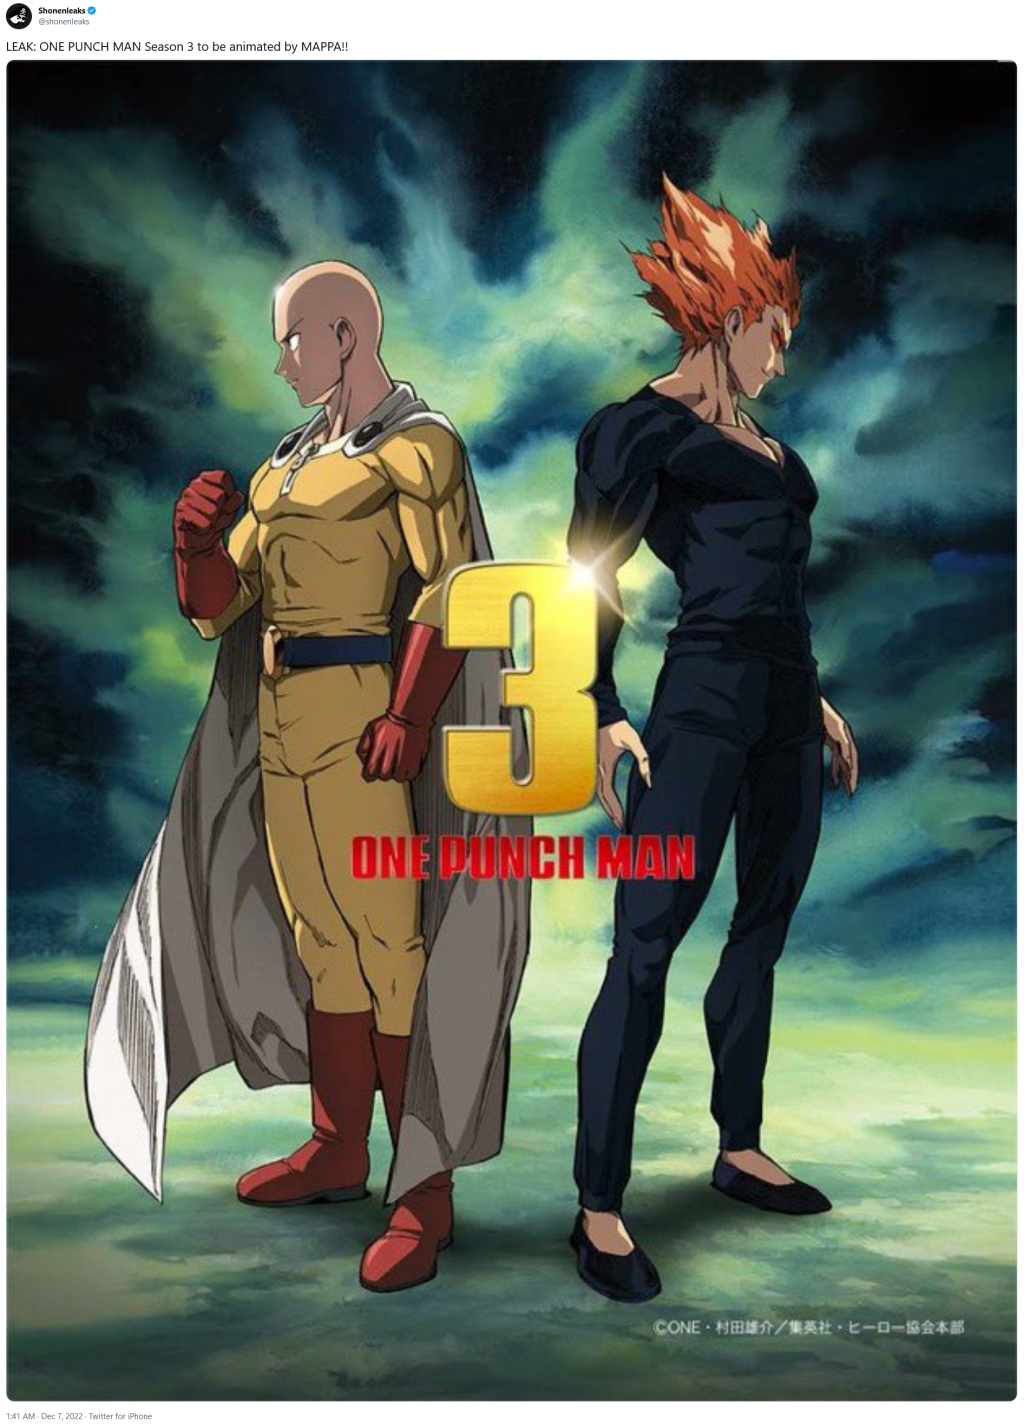 @ShonenLeaks claims 'One-Punch Man' Season 3 will be animated by MAPPA studio.